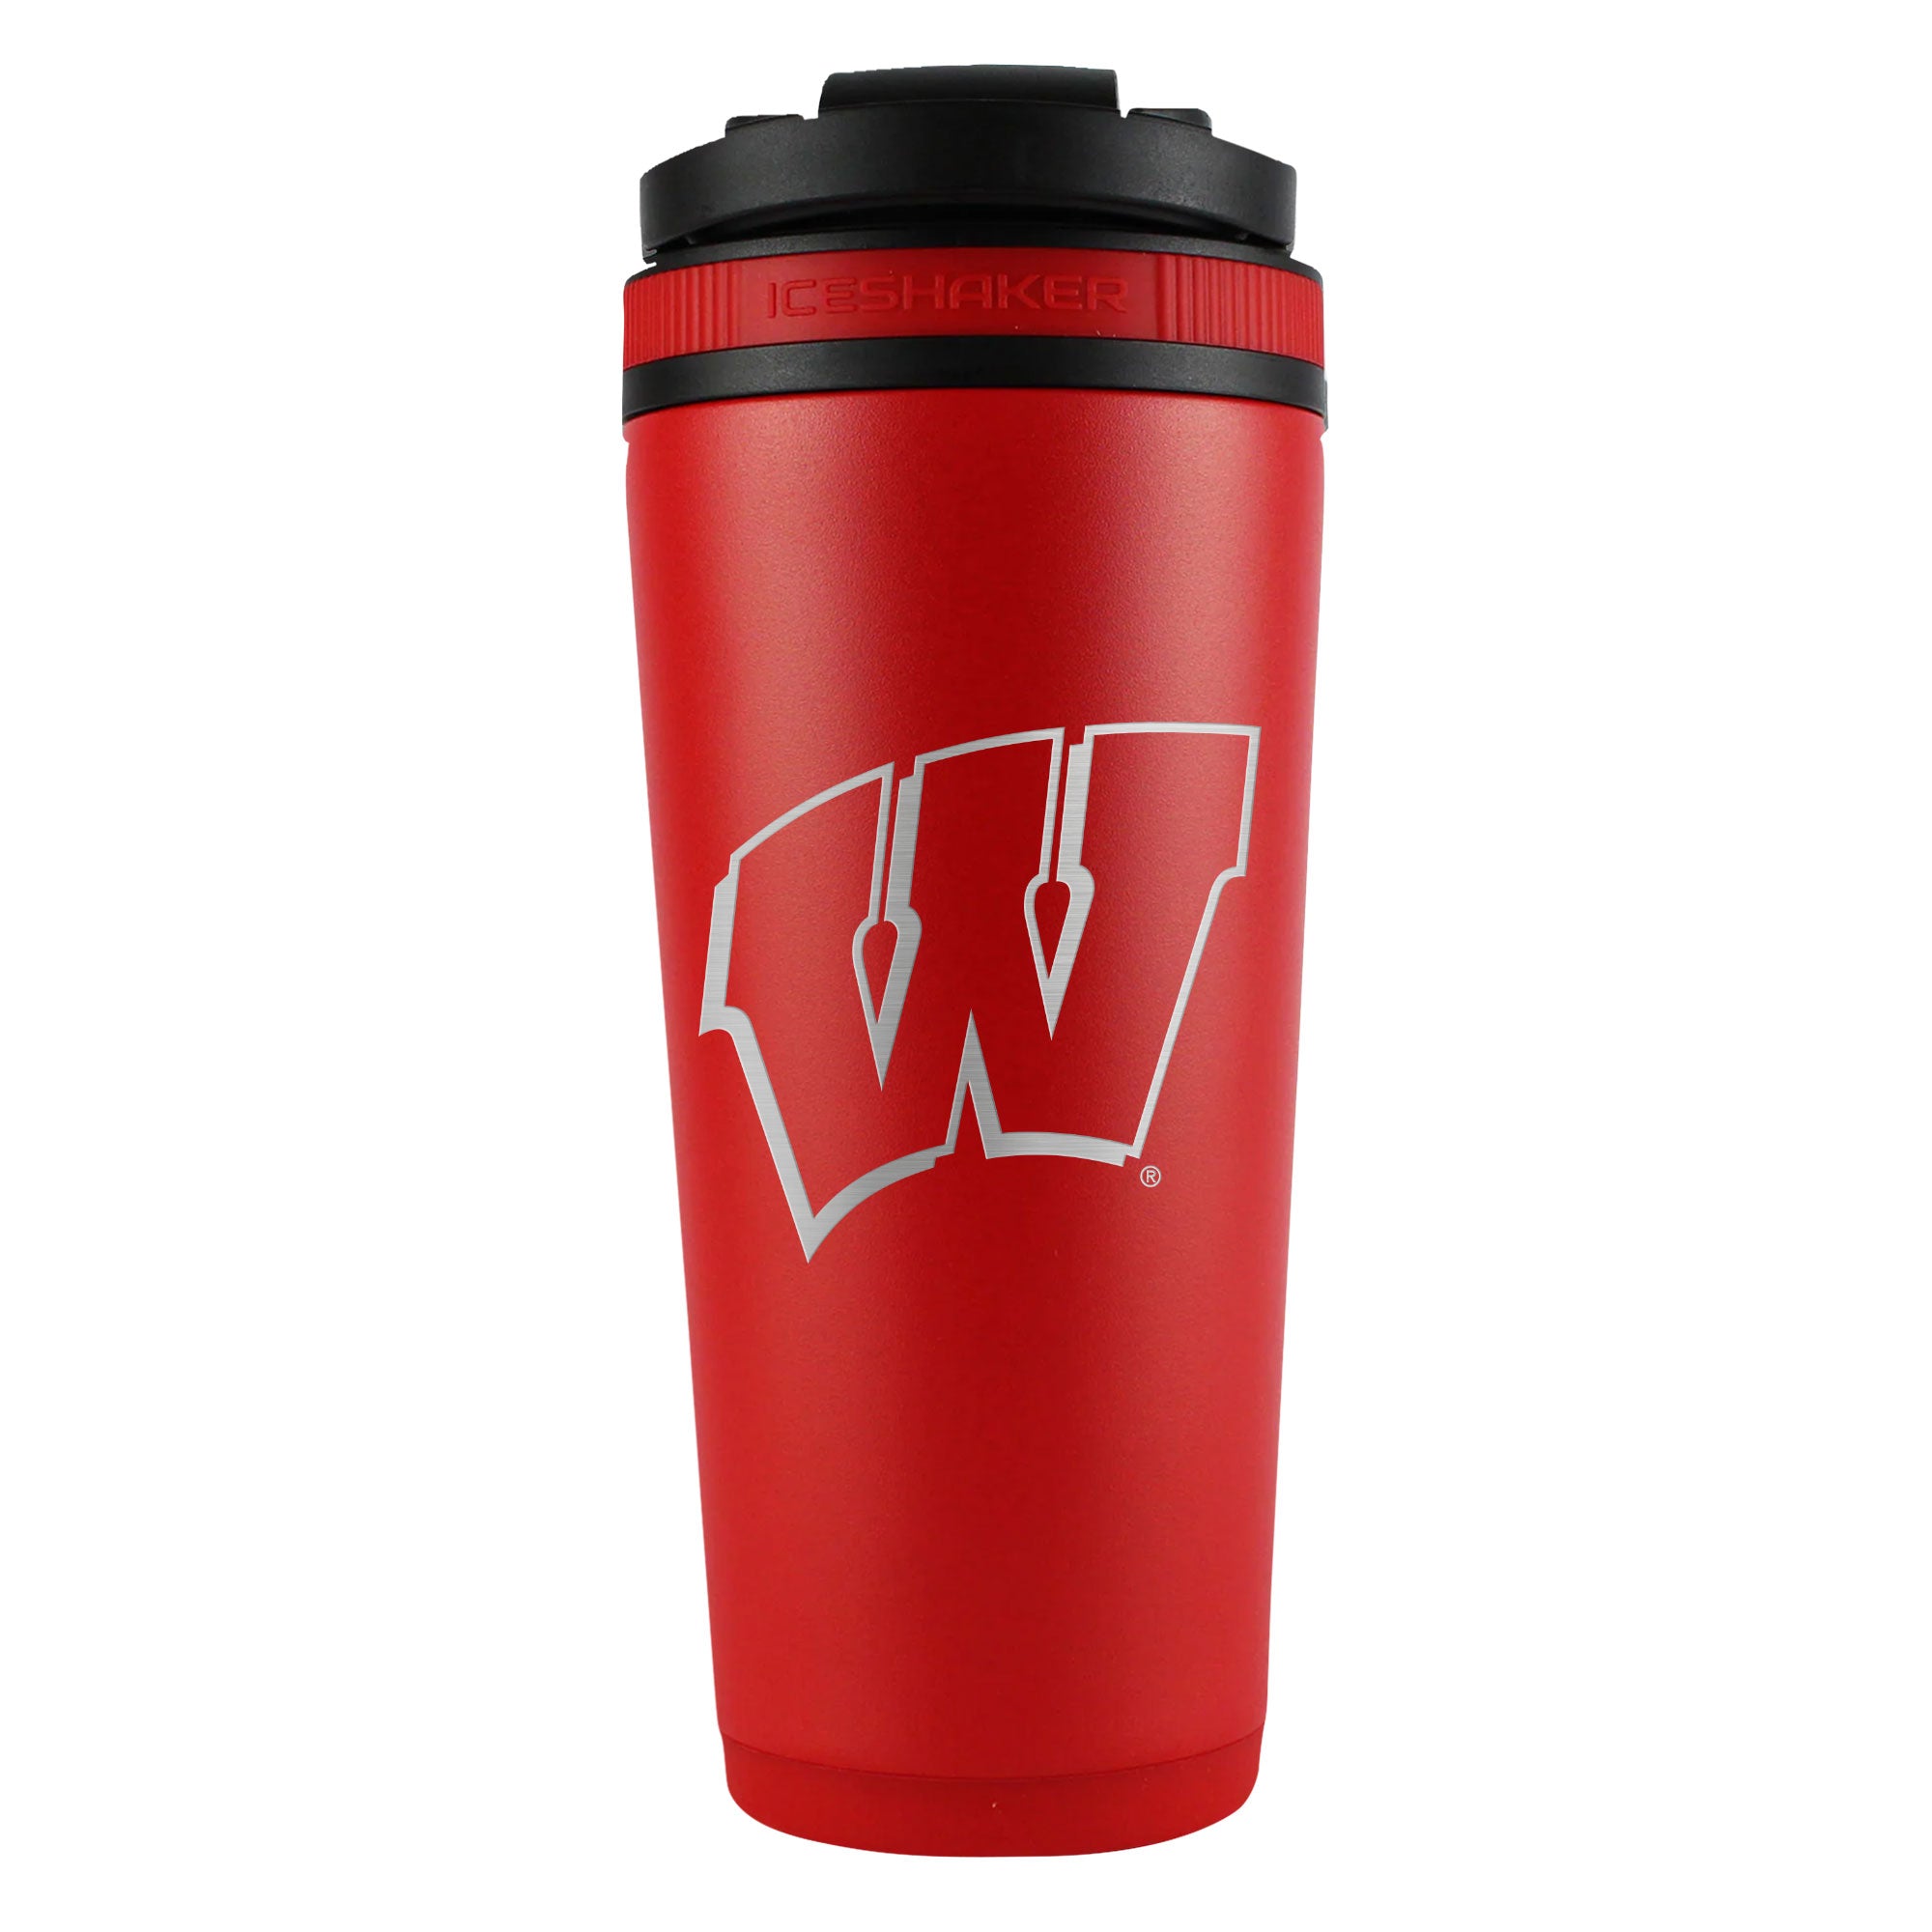 Officially Licensed University of Wisconsin 26oz Ice Shaker - Red